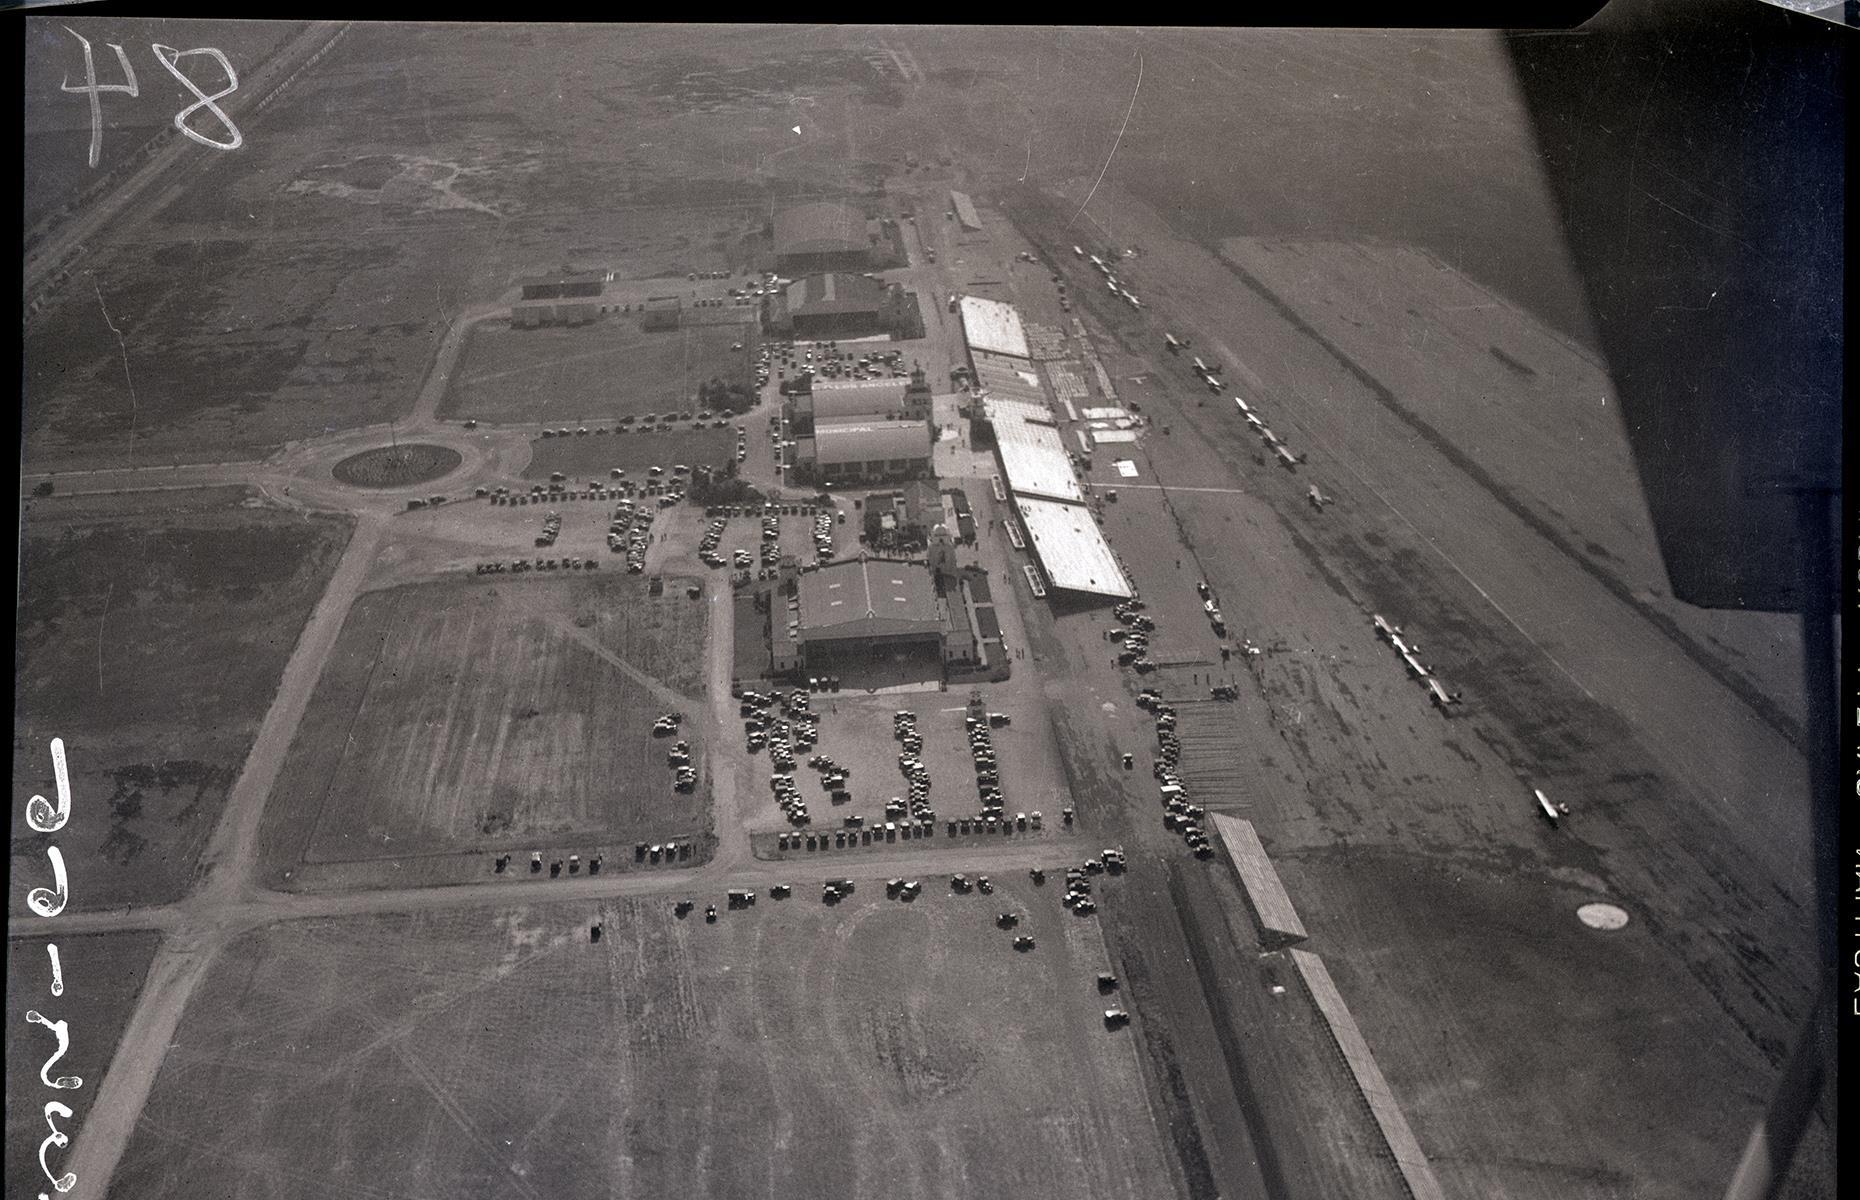 <p>LAX’s humble beginnings belie its modern mega-airport status. From as early as 1925, aviators were leasing the land (then fields of barley, beans and wheat) around where the airport now stands in order to fly their planes. One of these fields, Mines Field, was chosen as the site for Los Angeles’ municipal airport in 1928. The soon-to-be airport hosted the National Air Races later that year, and again in 1933 (pictured). Los Angeles Municipal Airport was officially dedicated in 1930 and within a few years was regarded as a major aircraft center.</p>